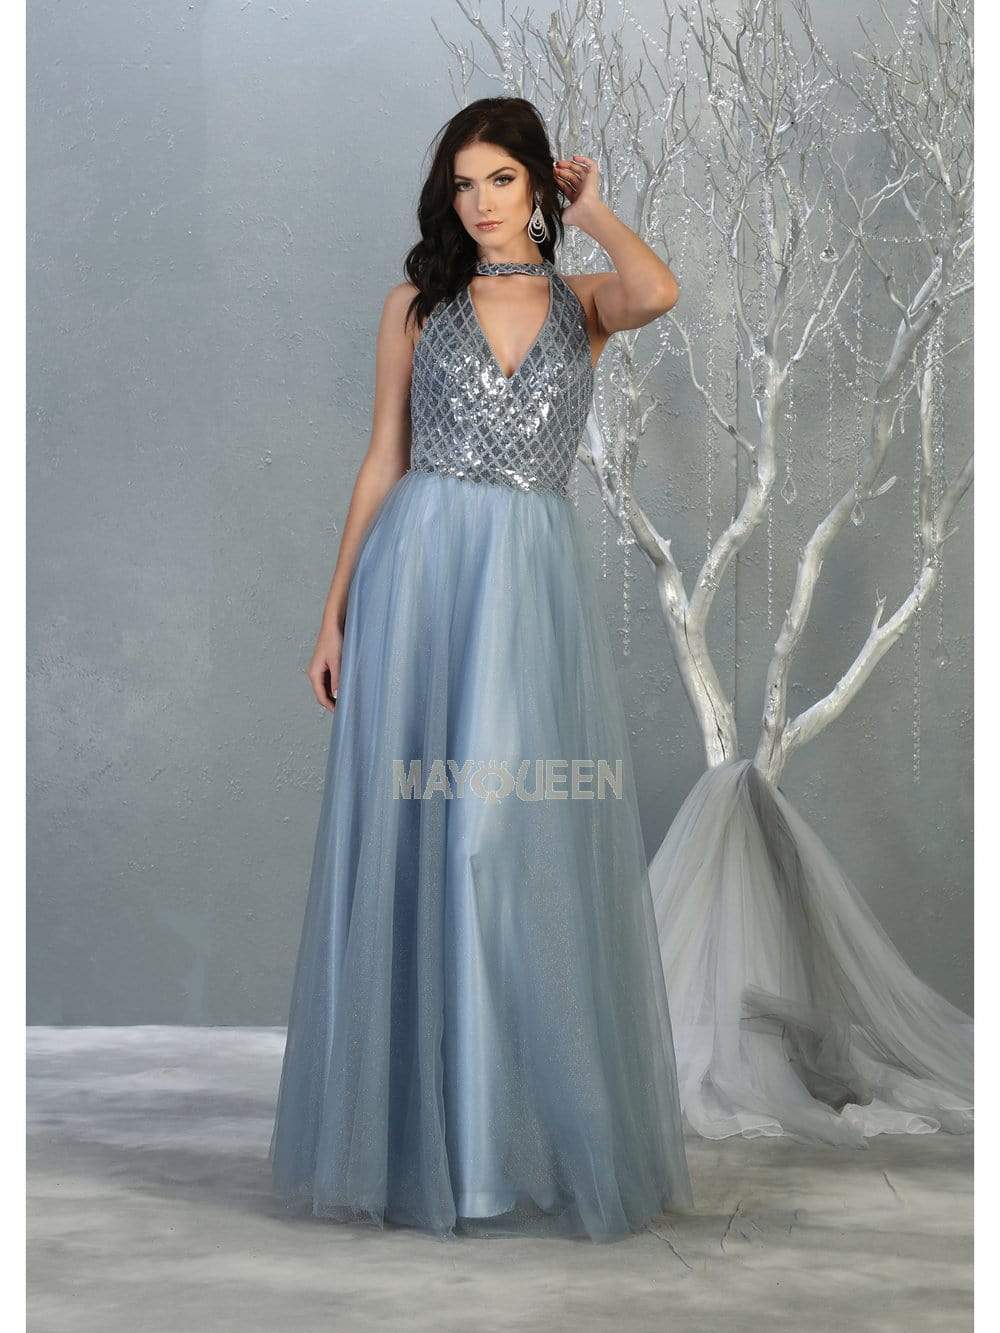 May Queen - RQ7863 Strappy High Halter A-Line Gown Prom Dresses 4 / Dusty-Blue